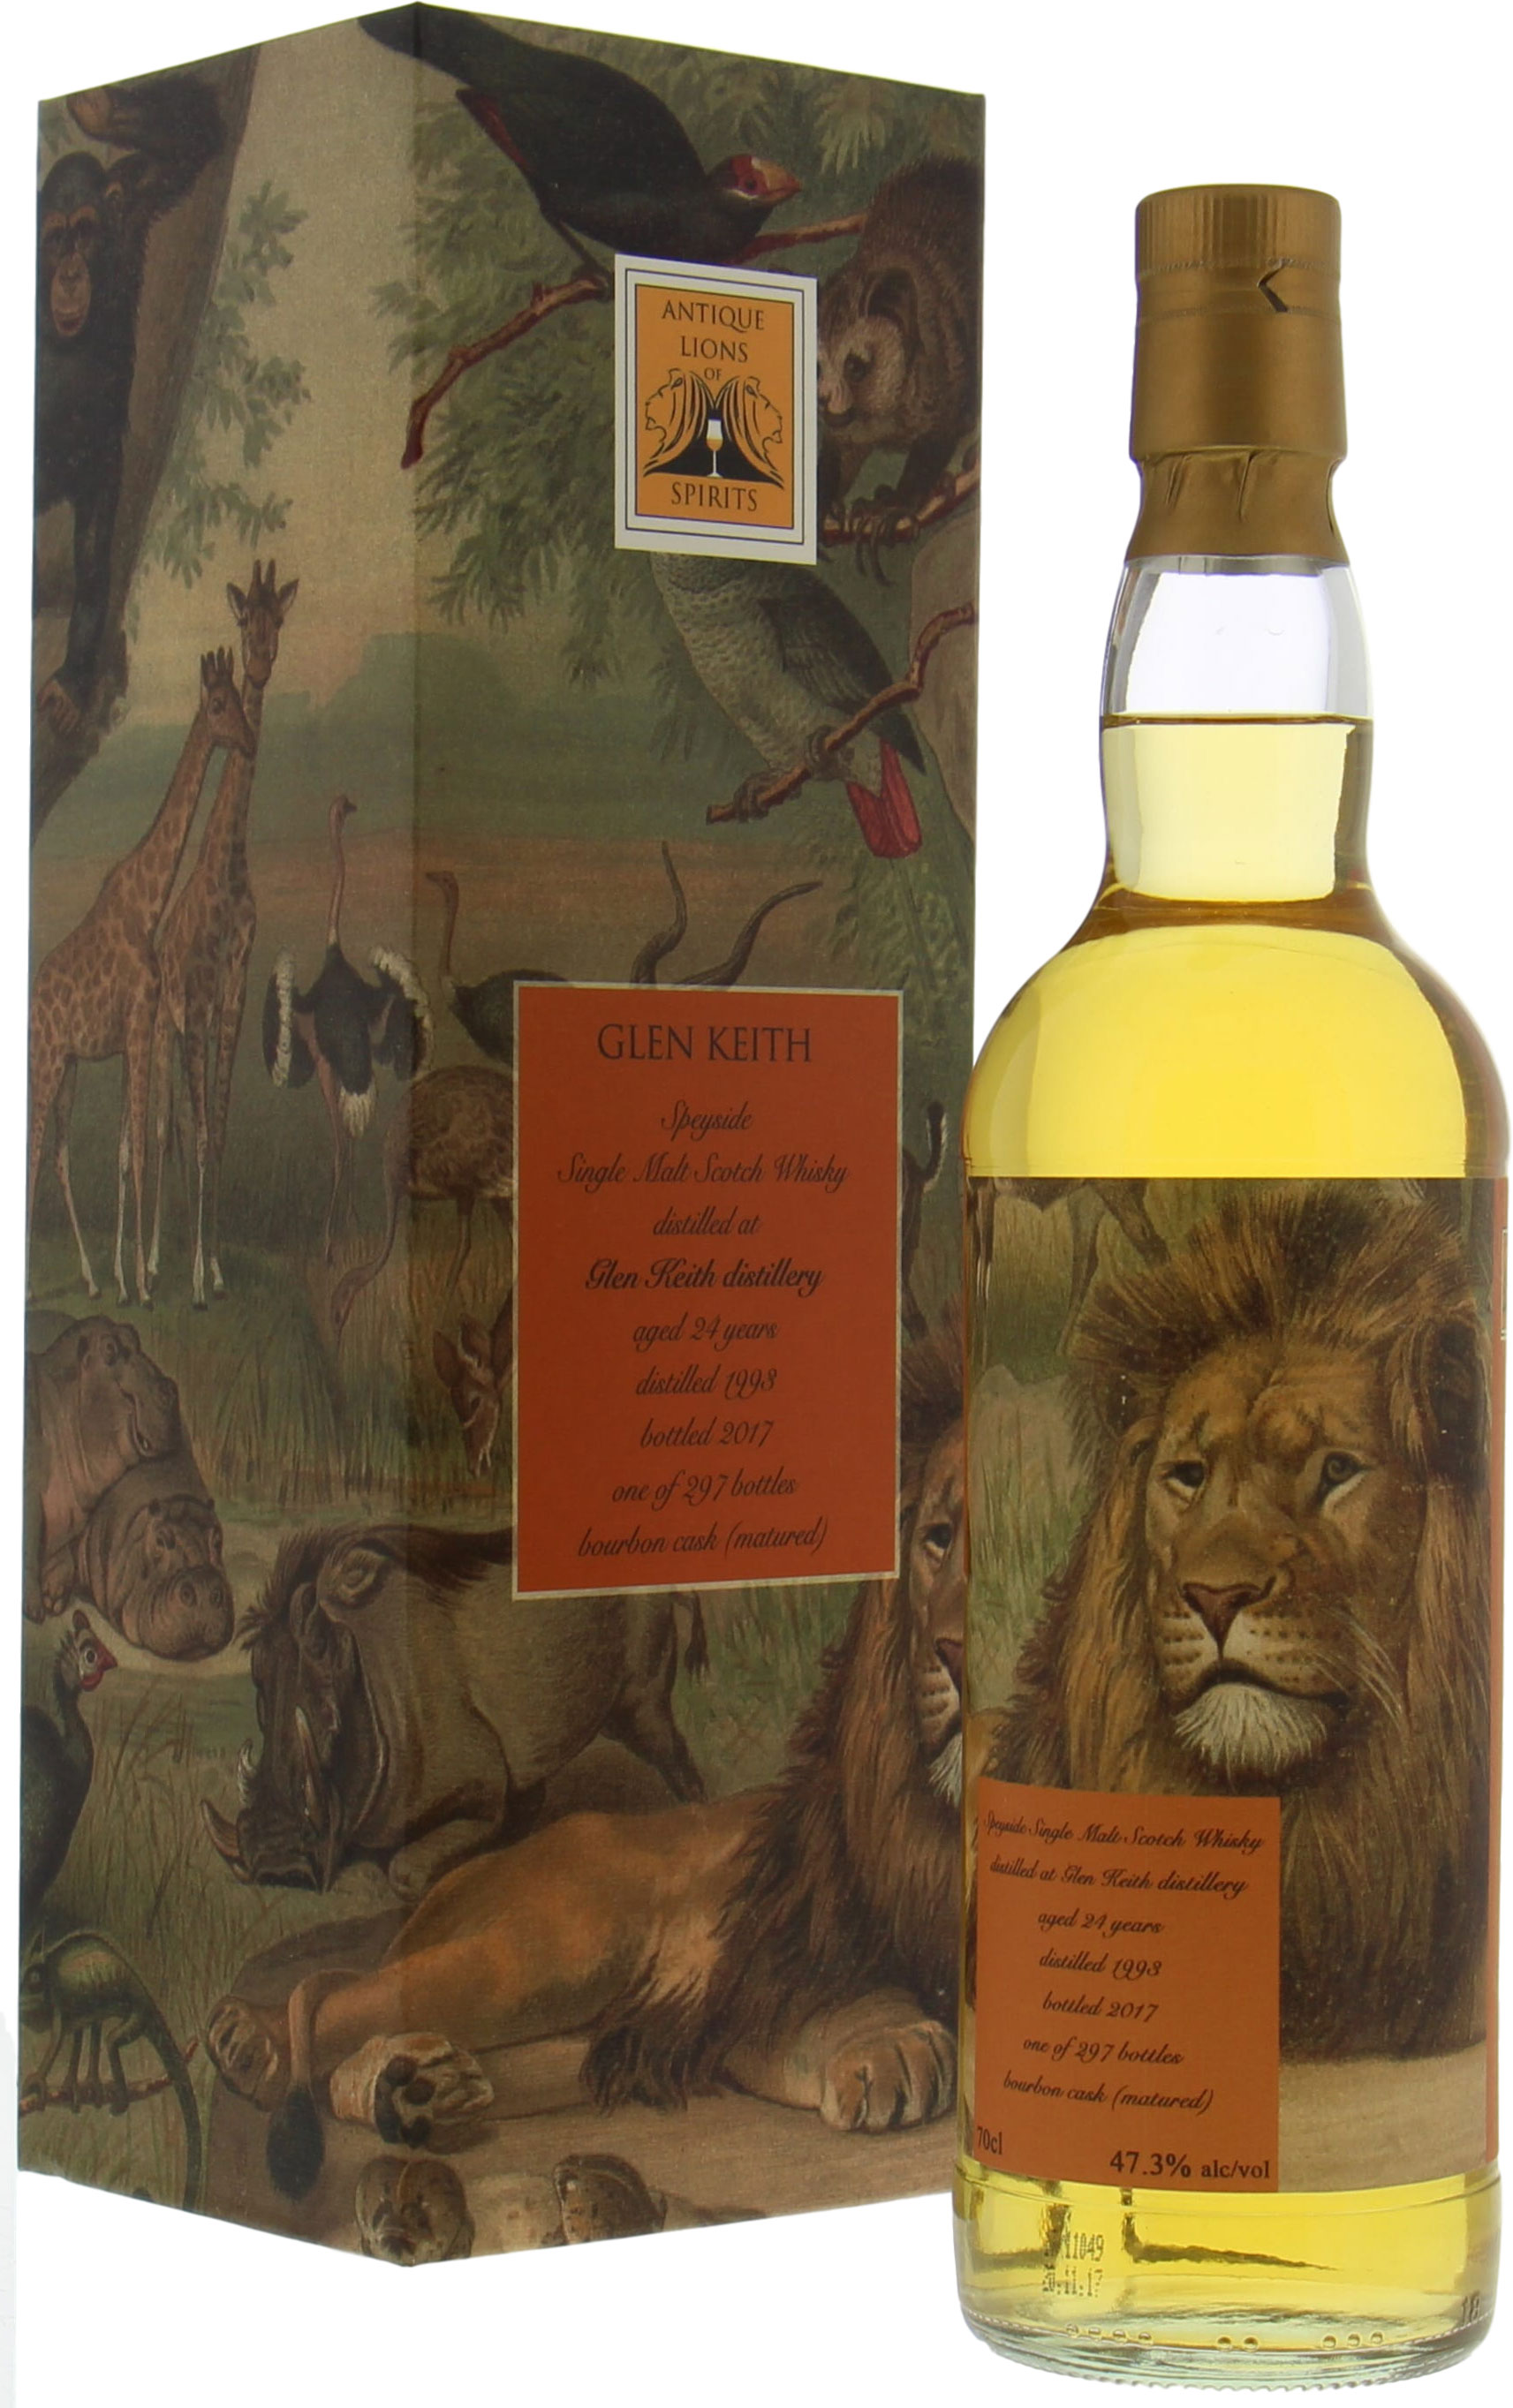 Glen Keith - 24 Years Old Antique Lions of Spirits Savannah Series 47.3% 1993 In Original Container